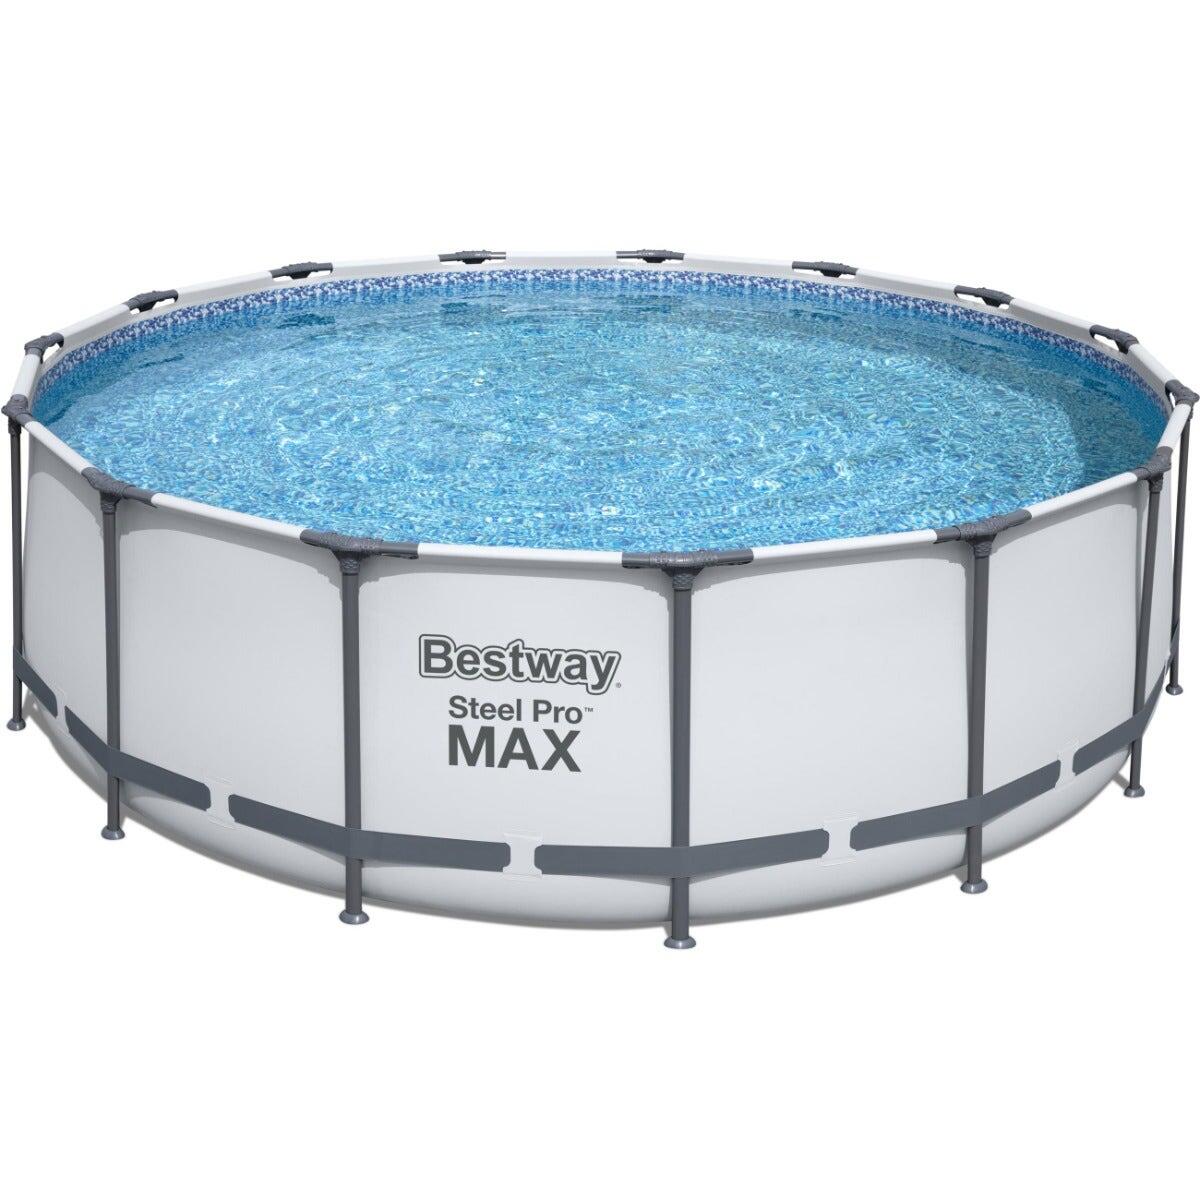 Bestway 15ft x 48" Steel Pro MAX Round Above Ground Swimming Pool 1/7